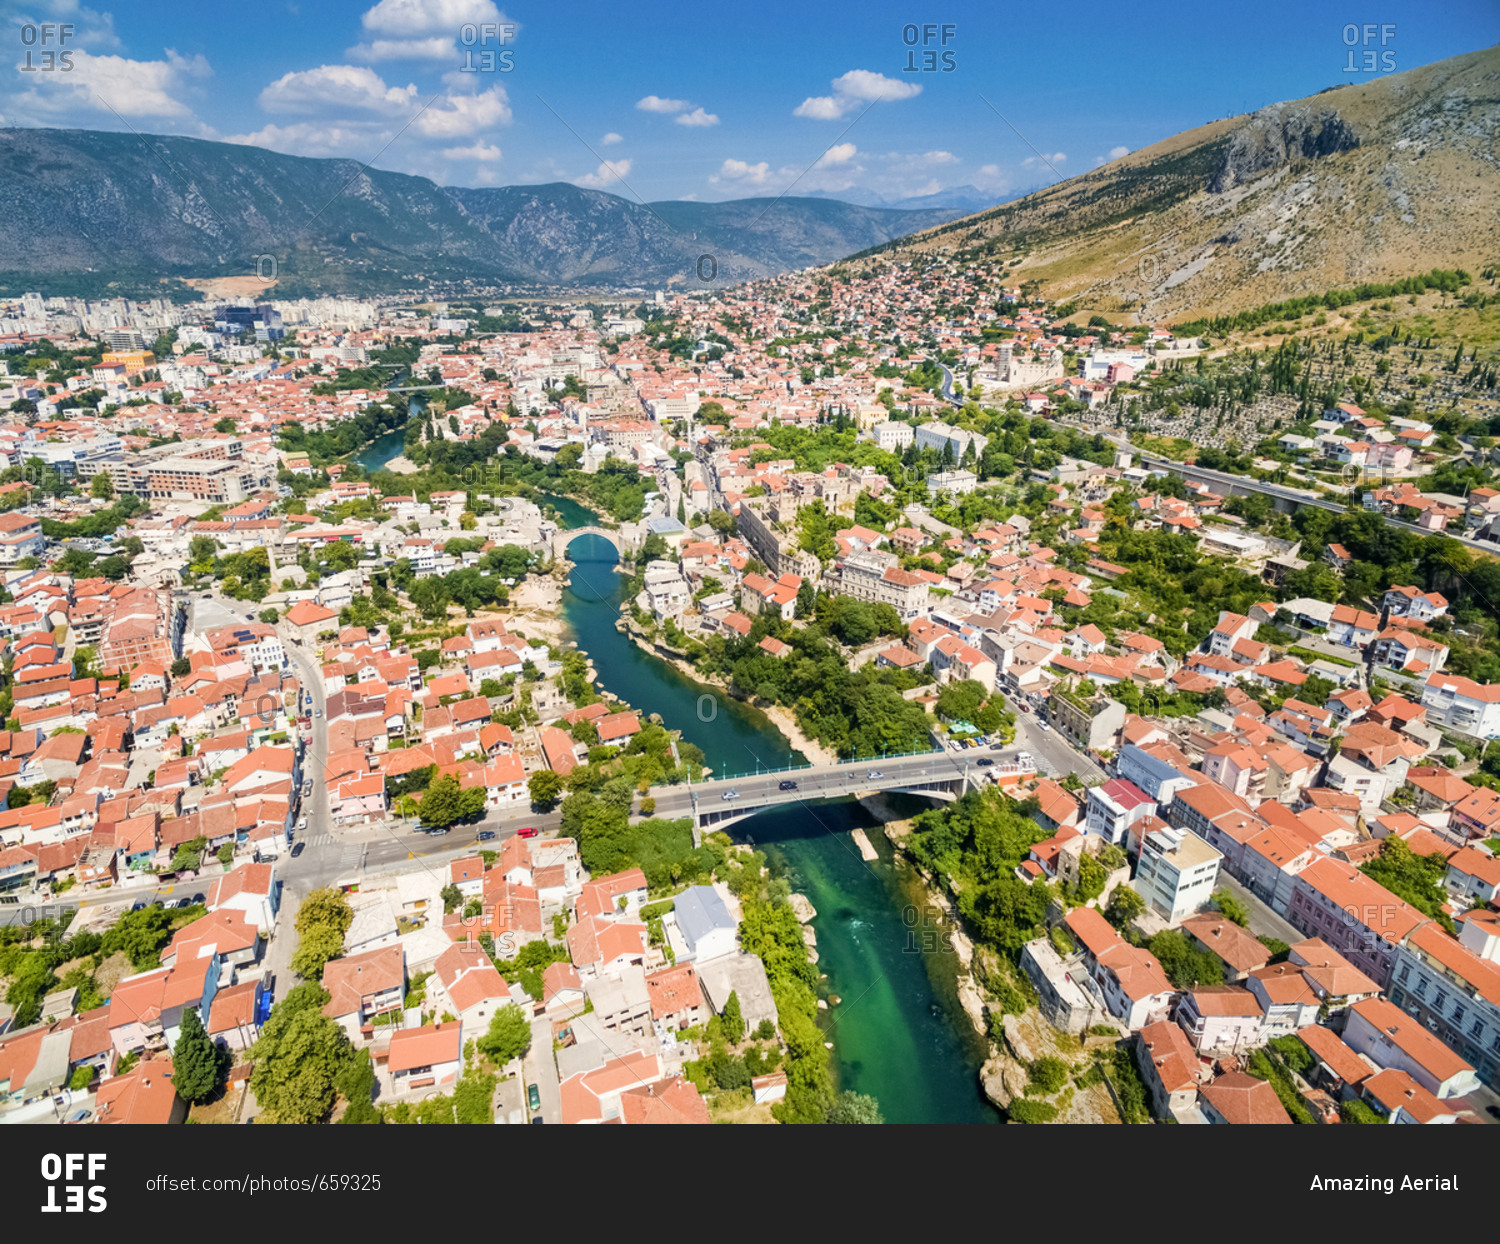 Aerial view of city of Mostar in Bosnia and Herzegovina and it\'s landmarks (Neretva river, Old bridge, Koski Mehmed Pasha Mosque).